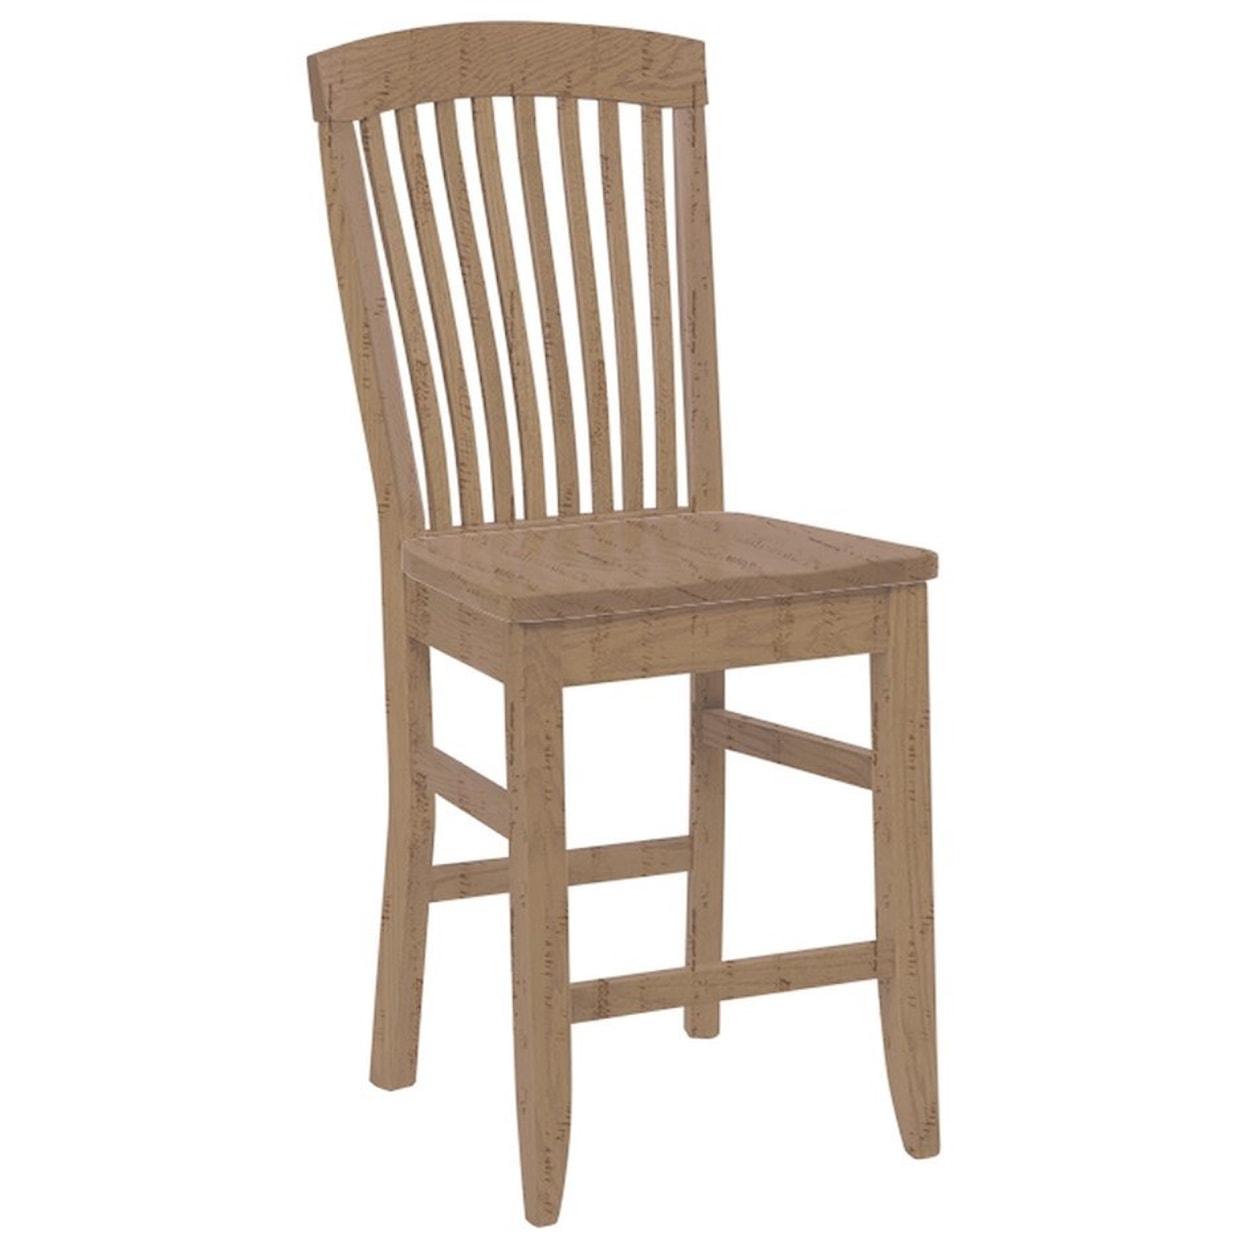 Daniel's Amish Chairs and Barstools Empire Stationary Counter Chair